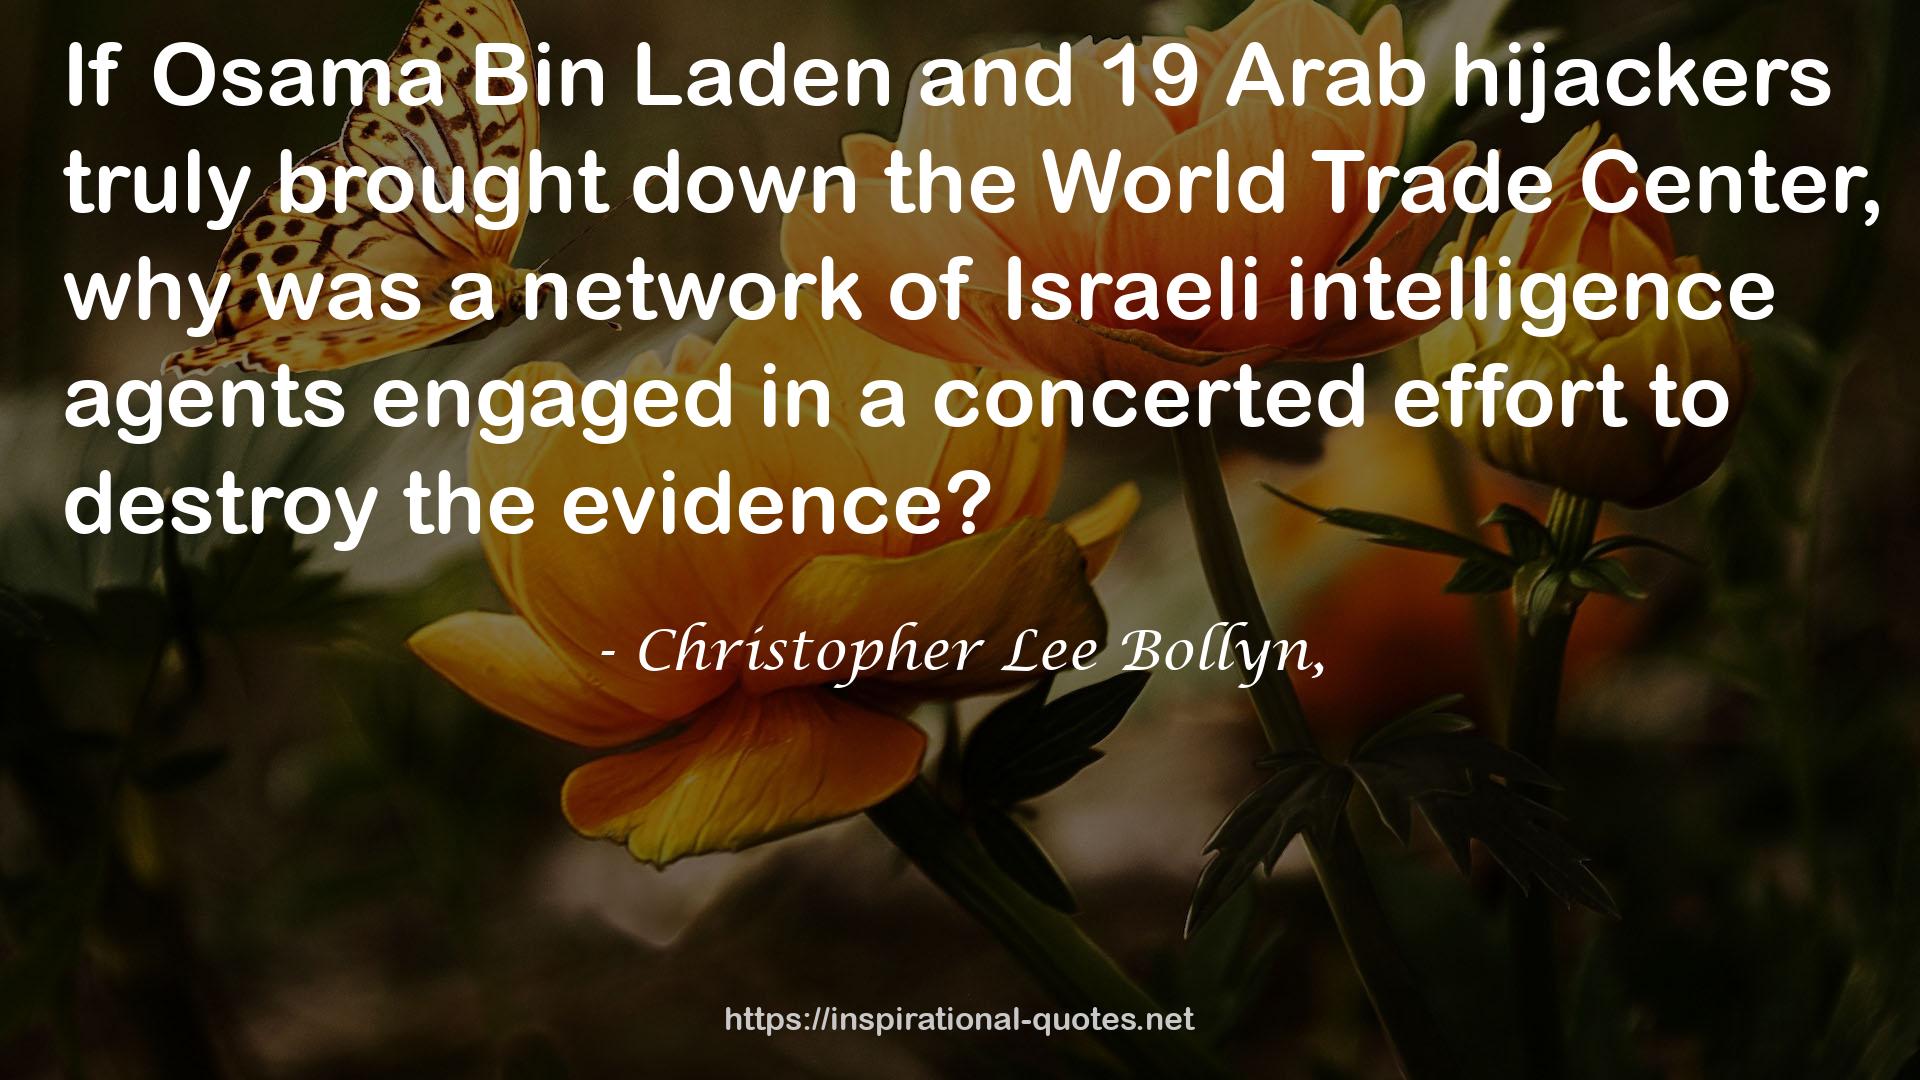 Christopher Lee Bollyn, QUOTES